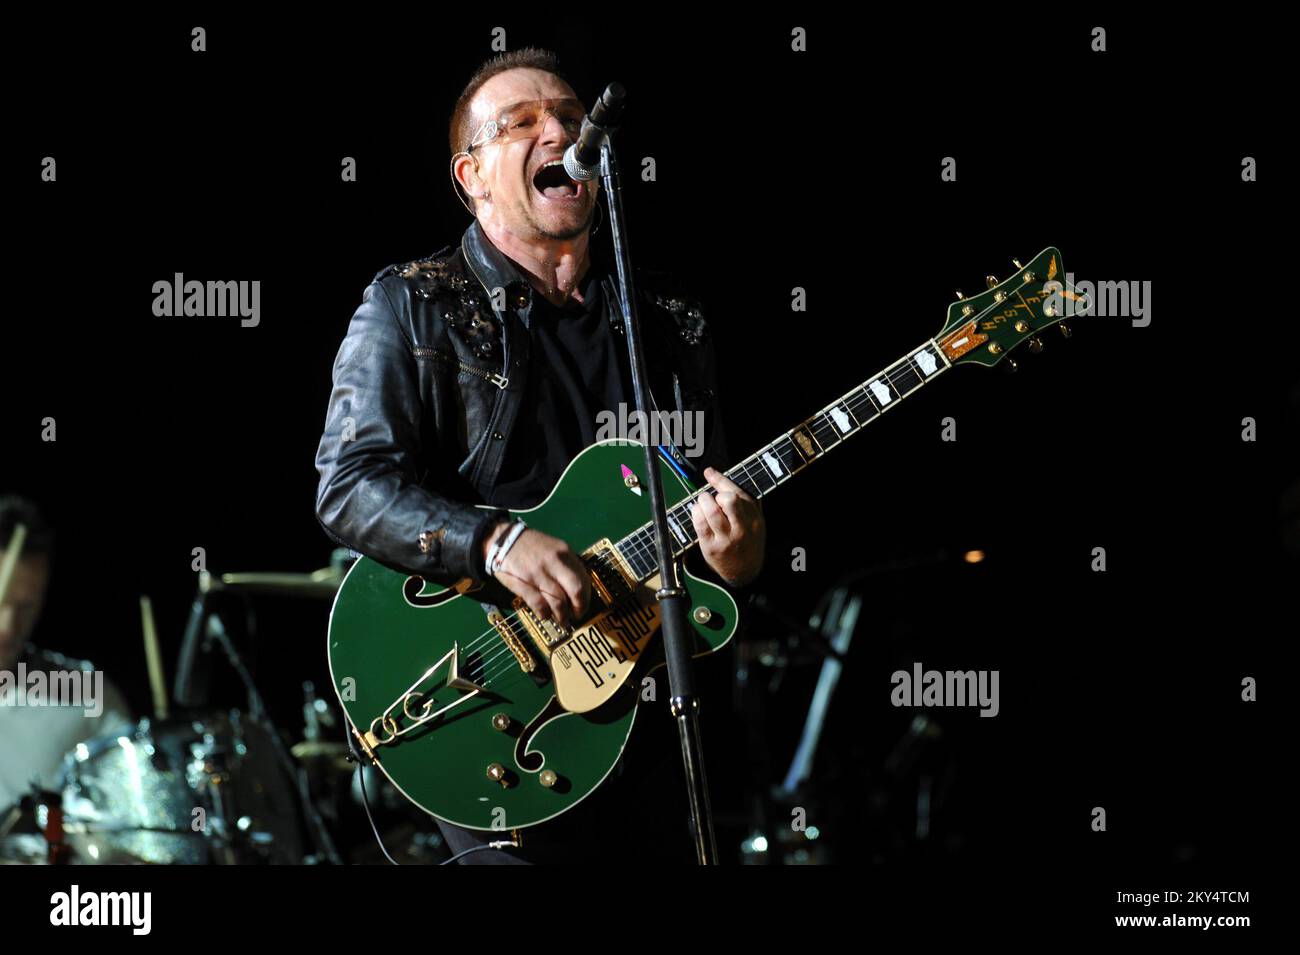 U2's Bono performs during their 360 world tour at the Camp Nou stadium in Barcelona Stock Photo